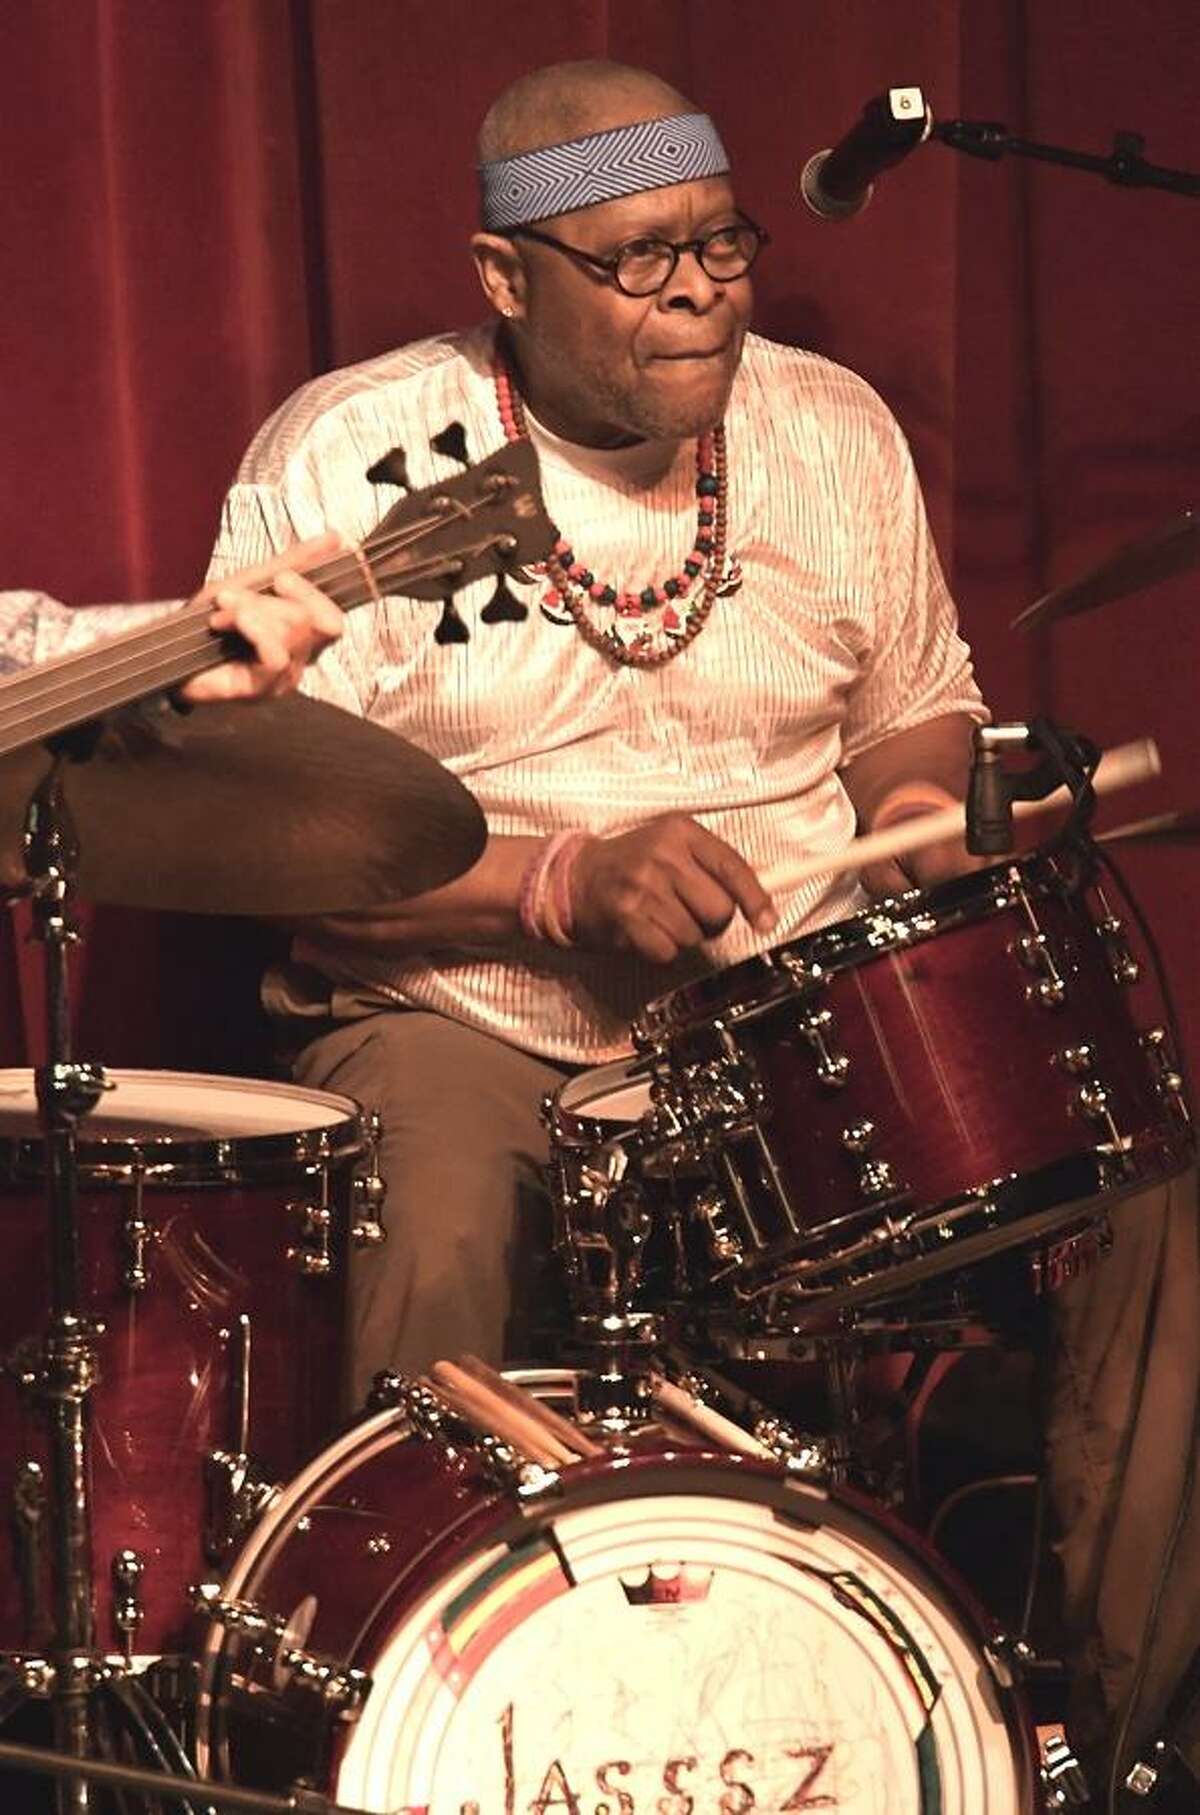 Legendary drummer, Rock and Roll Hall of Famer, and founding member of the Allman Brothers Band, Jaimoe and his Jasssz Band is shown performing to full house of fans at Bridge Street Live in Collinsville on December 23rd. Jaimoe's music combines elements of Jazz, Blues, Rock, and R& into a unique blend that captures the spirit and stirs the soul. To learn more about entertainment coming to Bridge Street Live you can call 860-693-9762 or visitwww.41bridgestreet.com